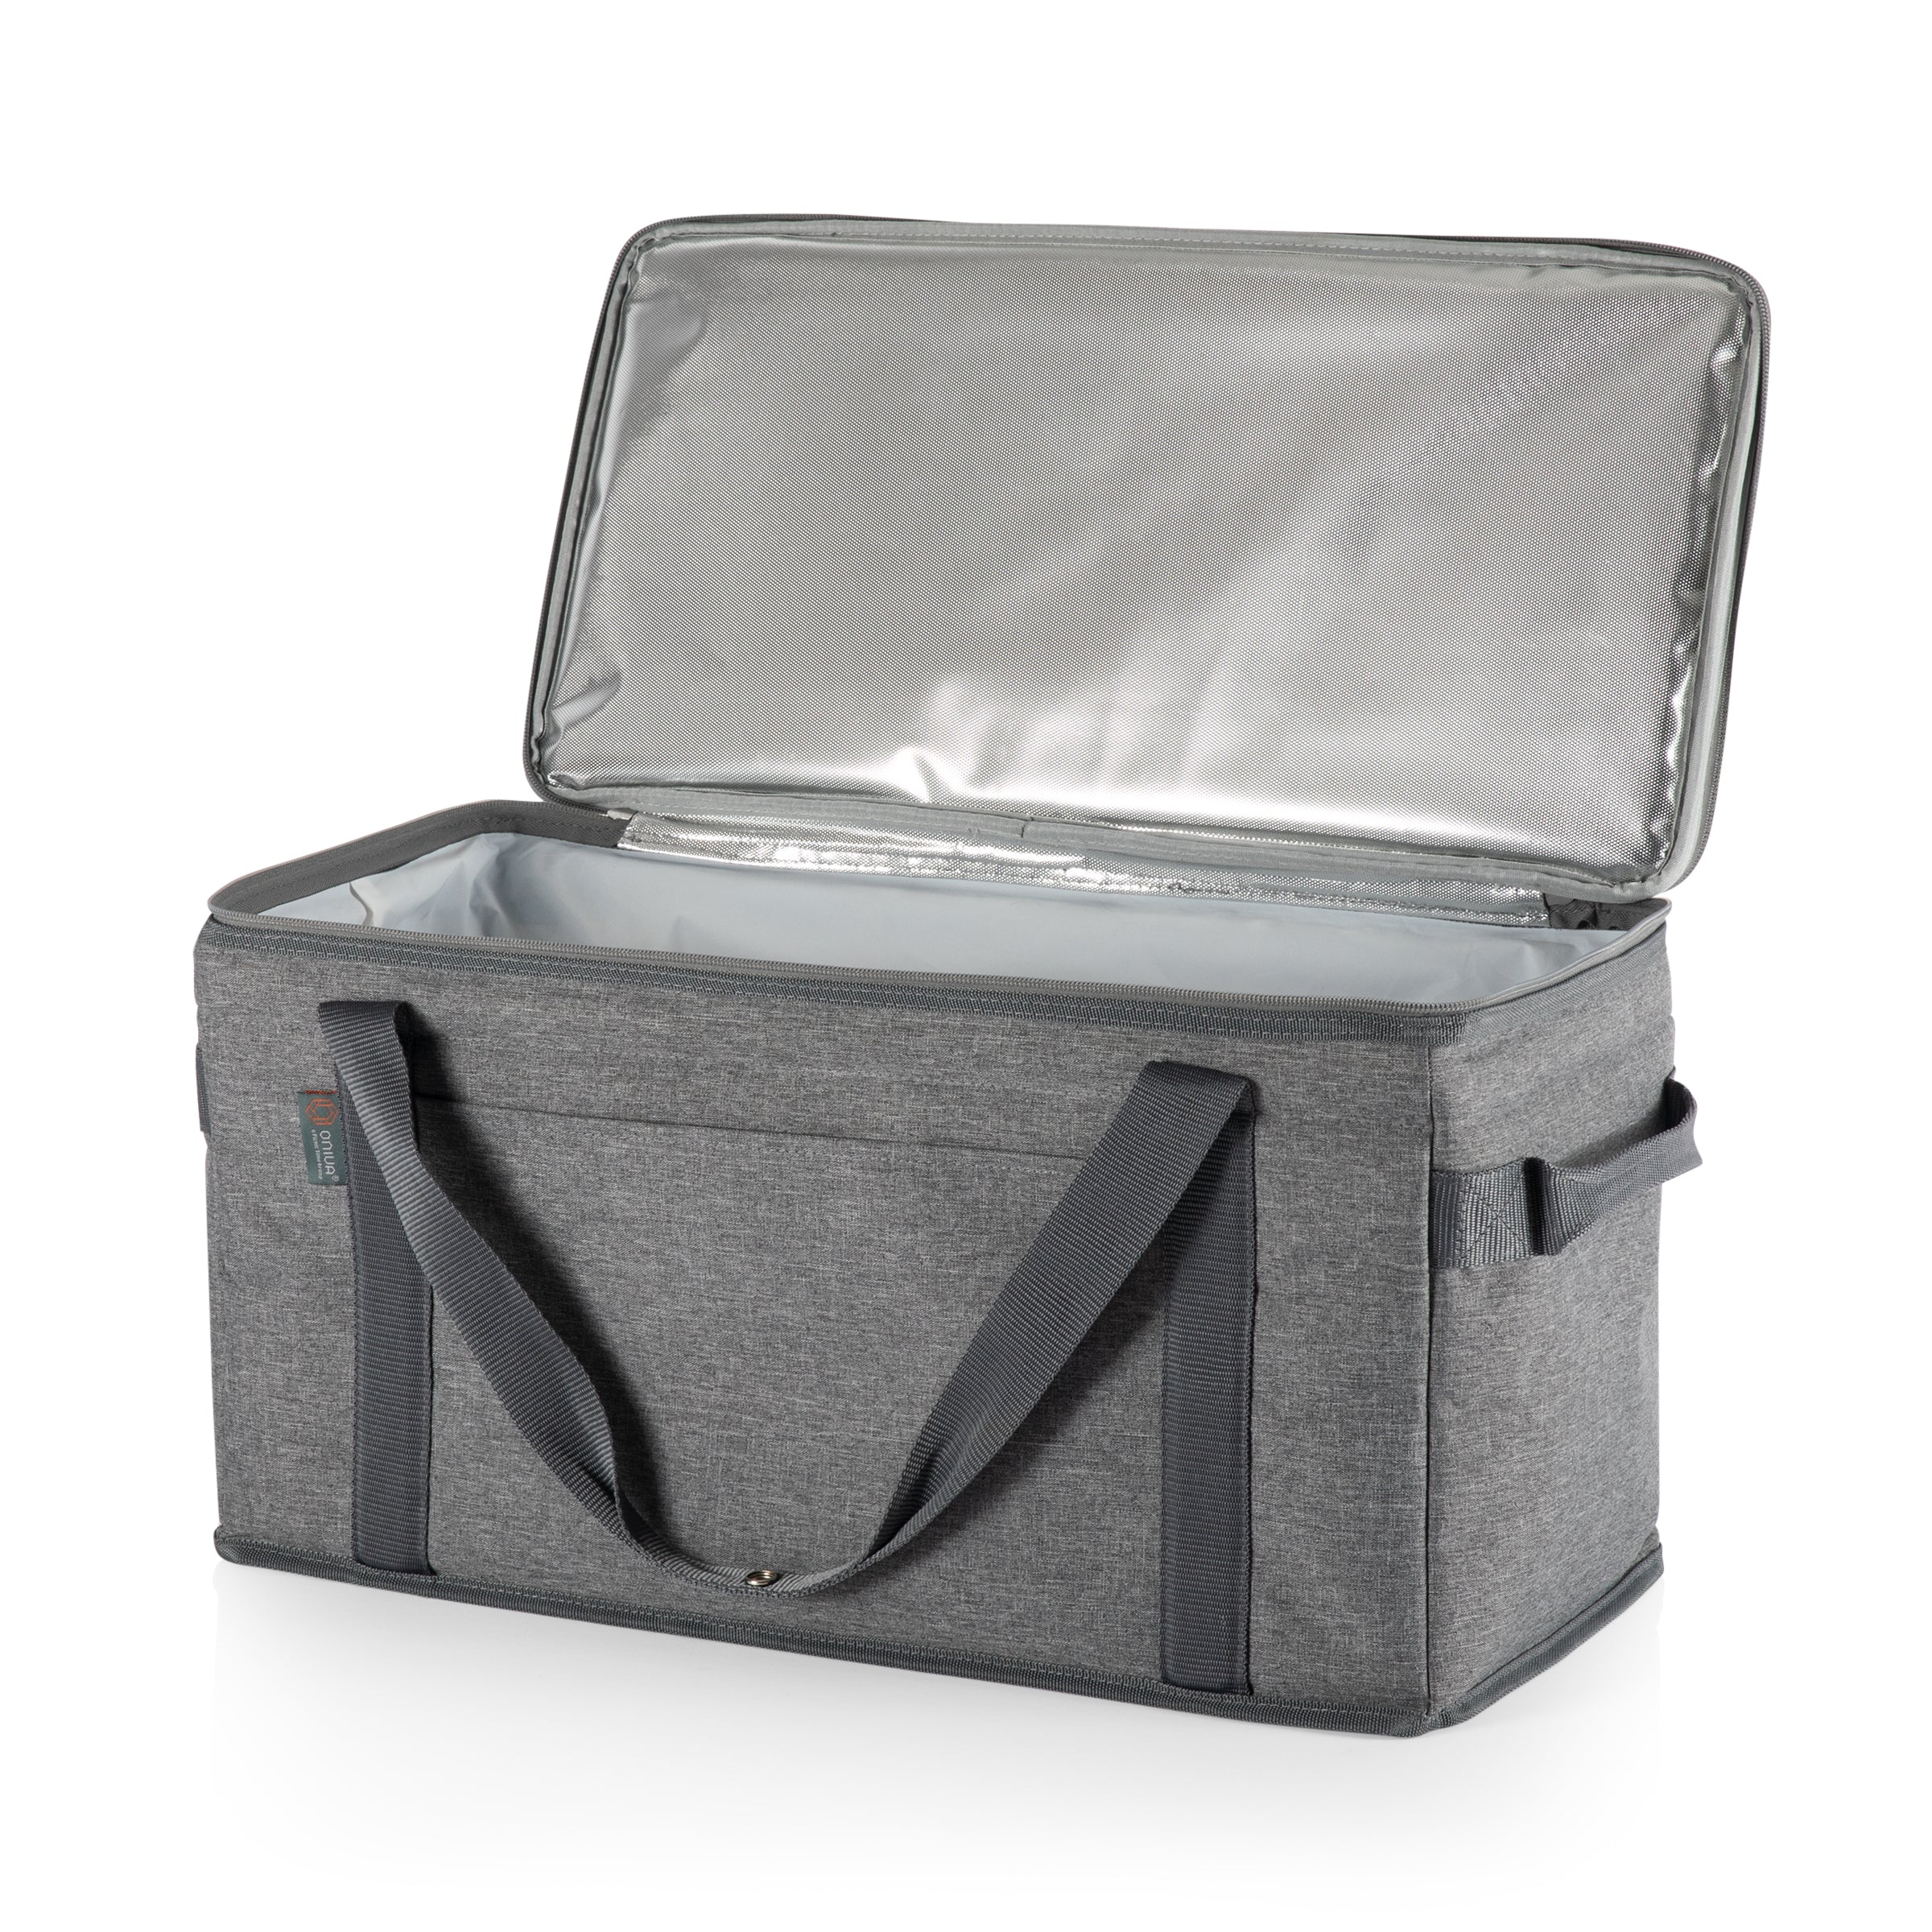 New York Jets - 64 Can Collapsible Cooler